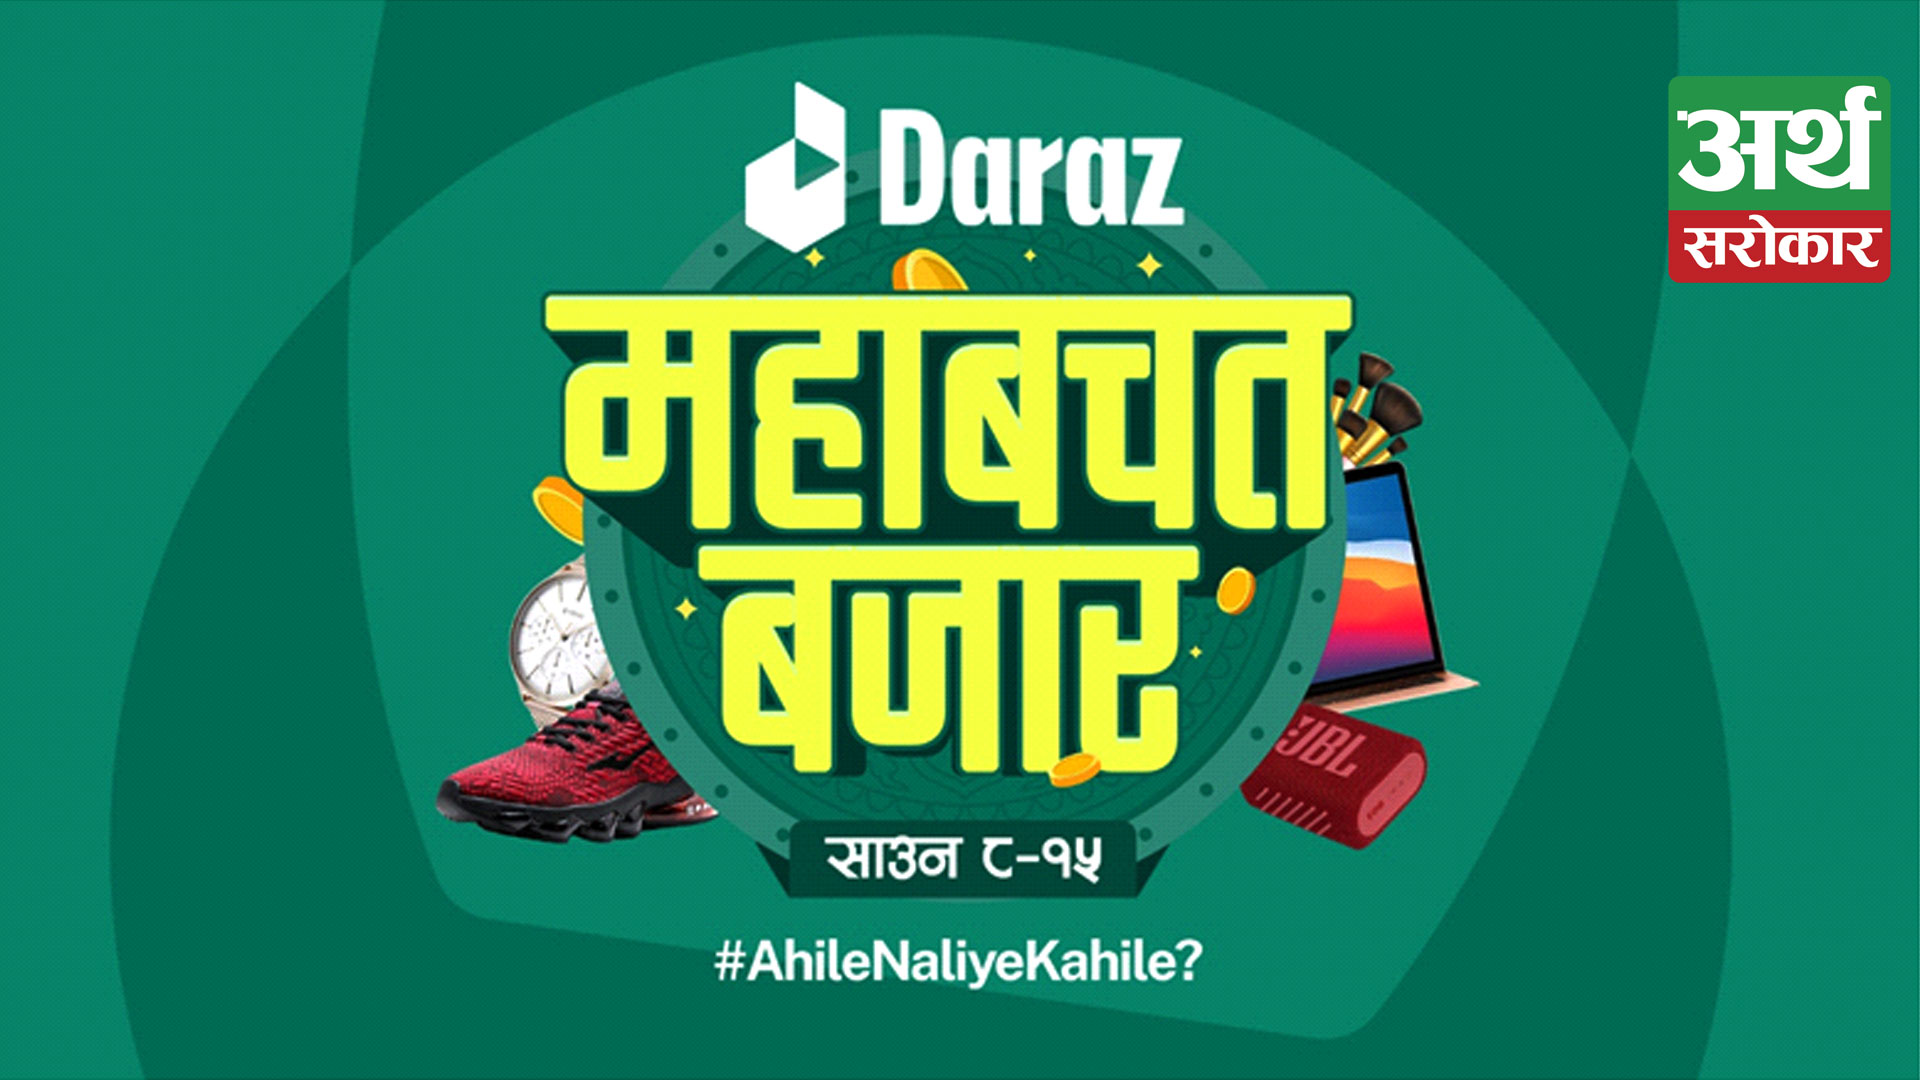 DARAZ PROMOTES SMART SHOPPING VIA MAHABACHAT BAZAAR CAMPAIGN – CHANCE FOR CUSTOMERS TO WIN A ROUND TRIP TO TURKIYE